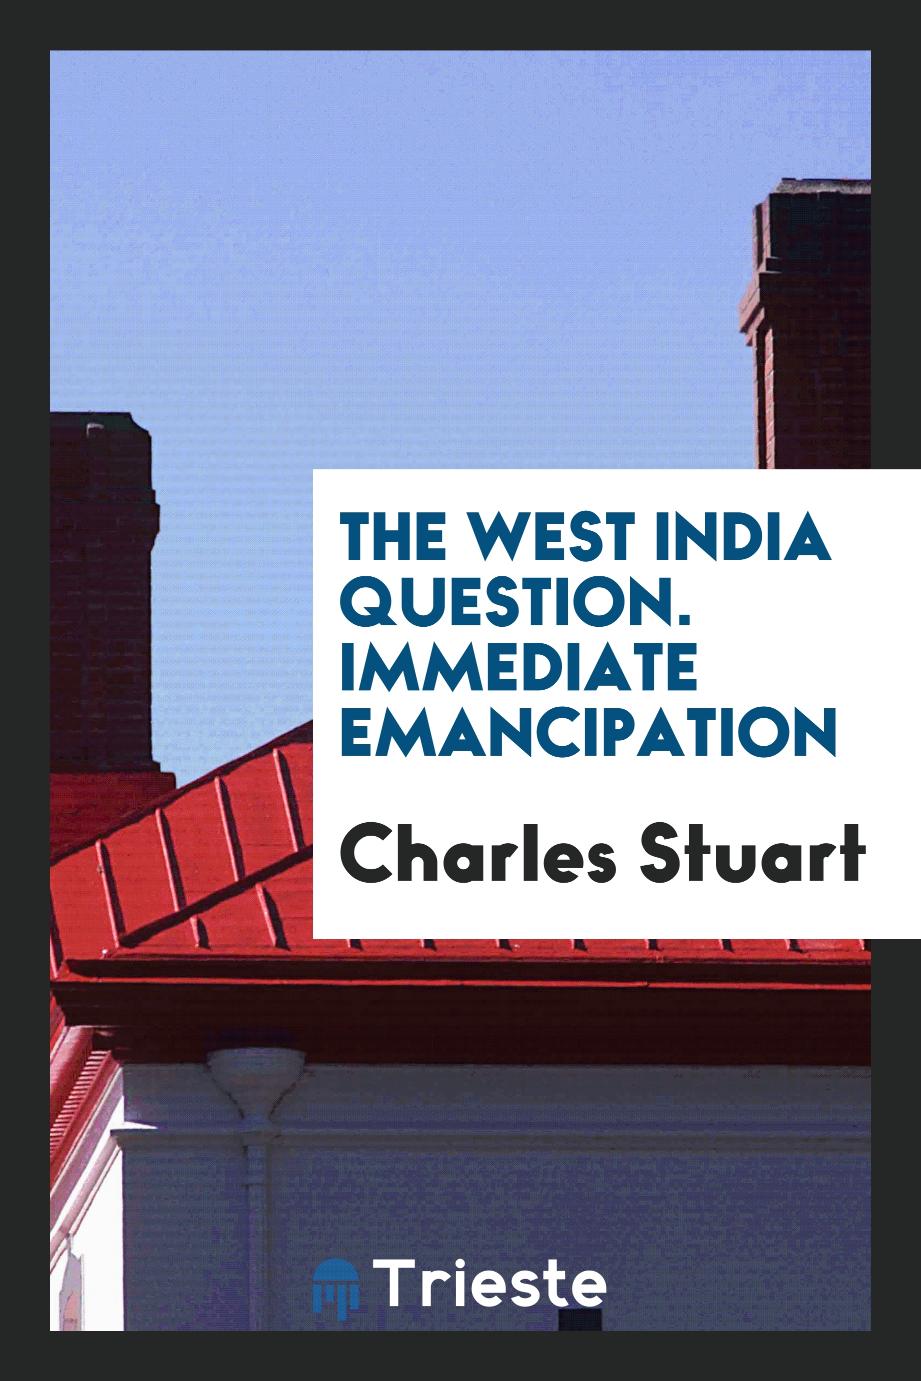 The West India question. Immediate emancipation